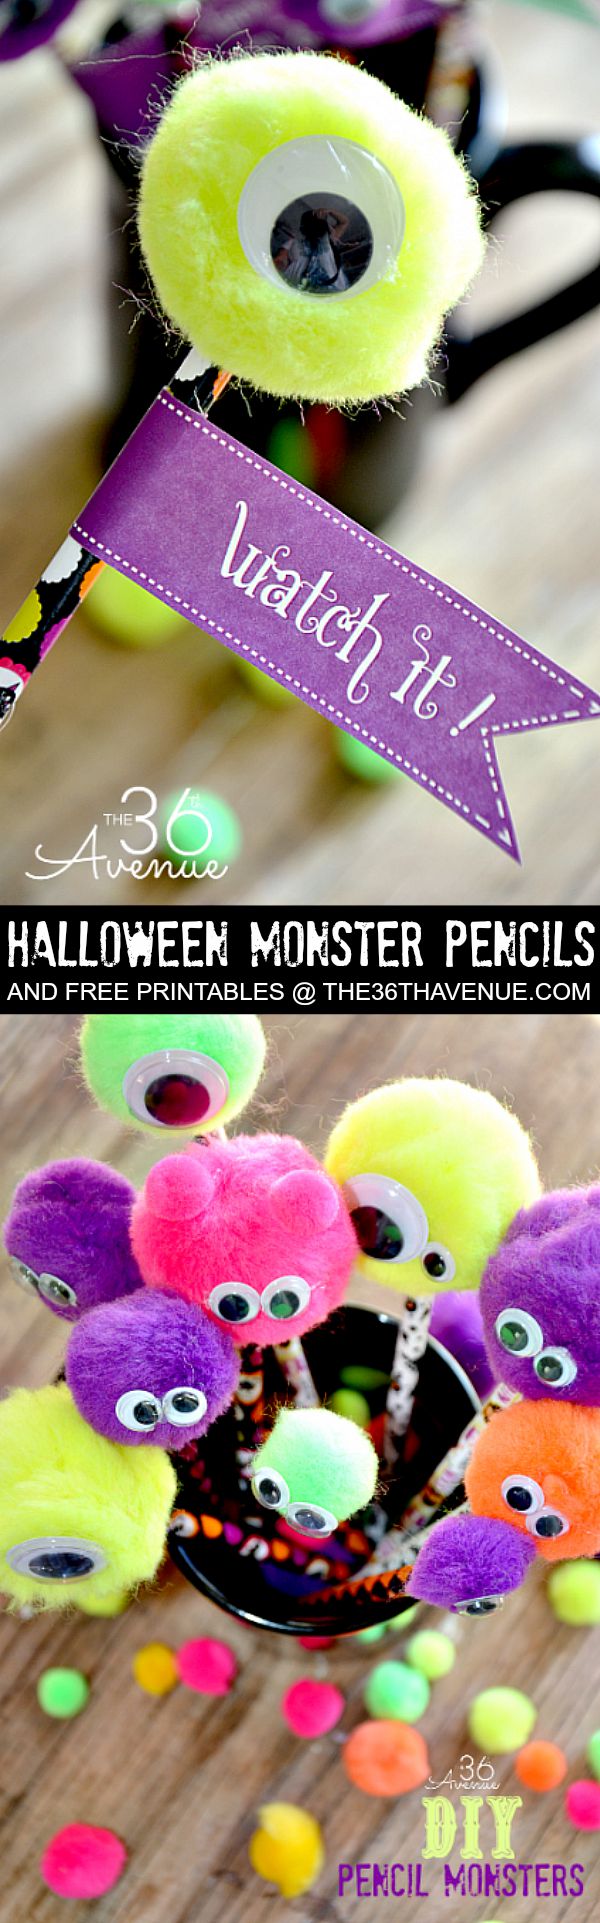 Halloween - Halloween Adorable Monster Pencils and Free Printable at the36thavenue.com